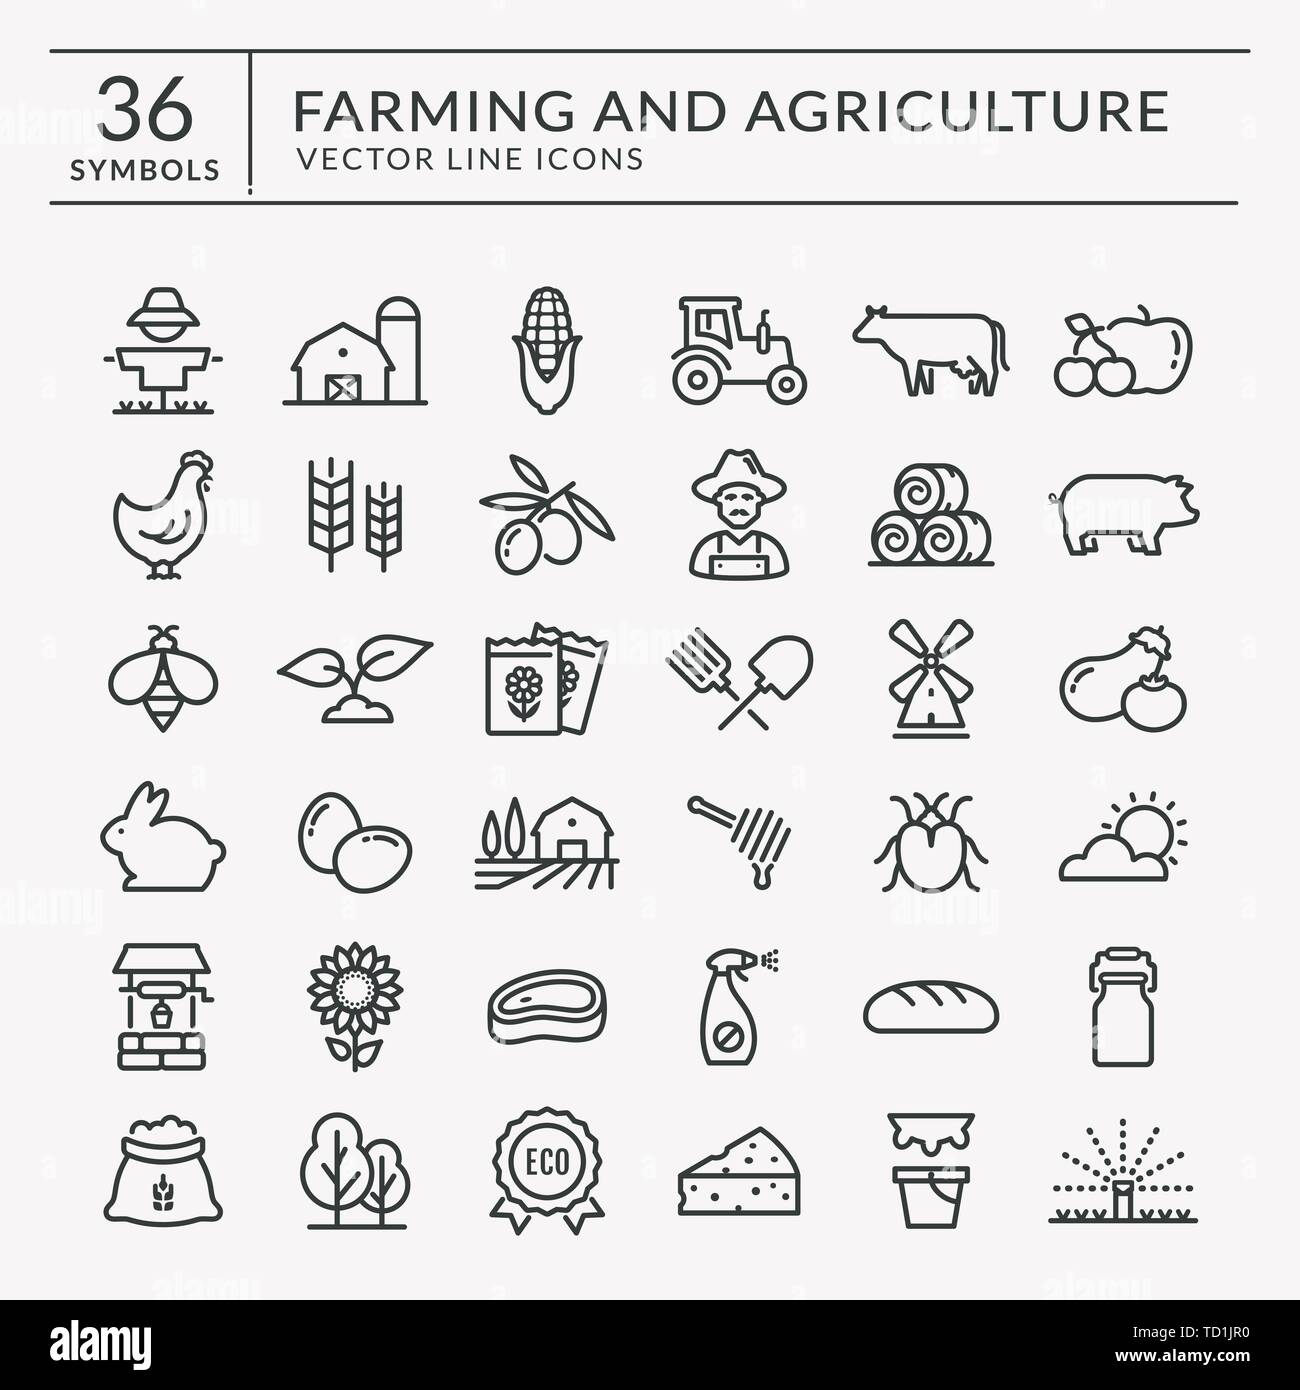 Farming and agriculture line icon set. Vector isolated farm and countryside outline symbols: cereal crop, fruits, vegetables, natural dairy products. Stock Vector